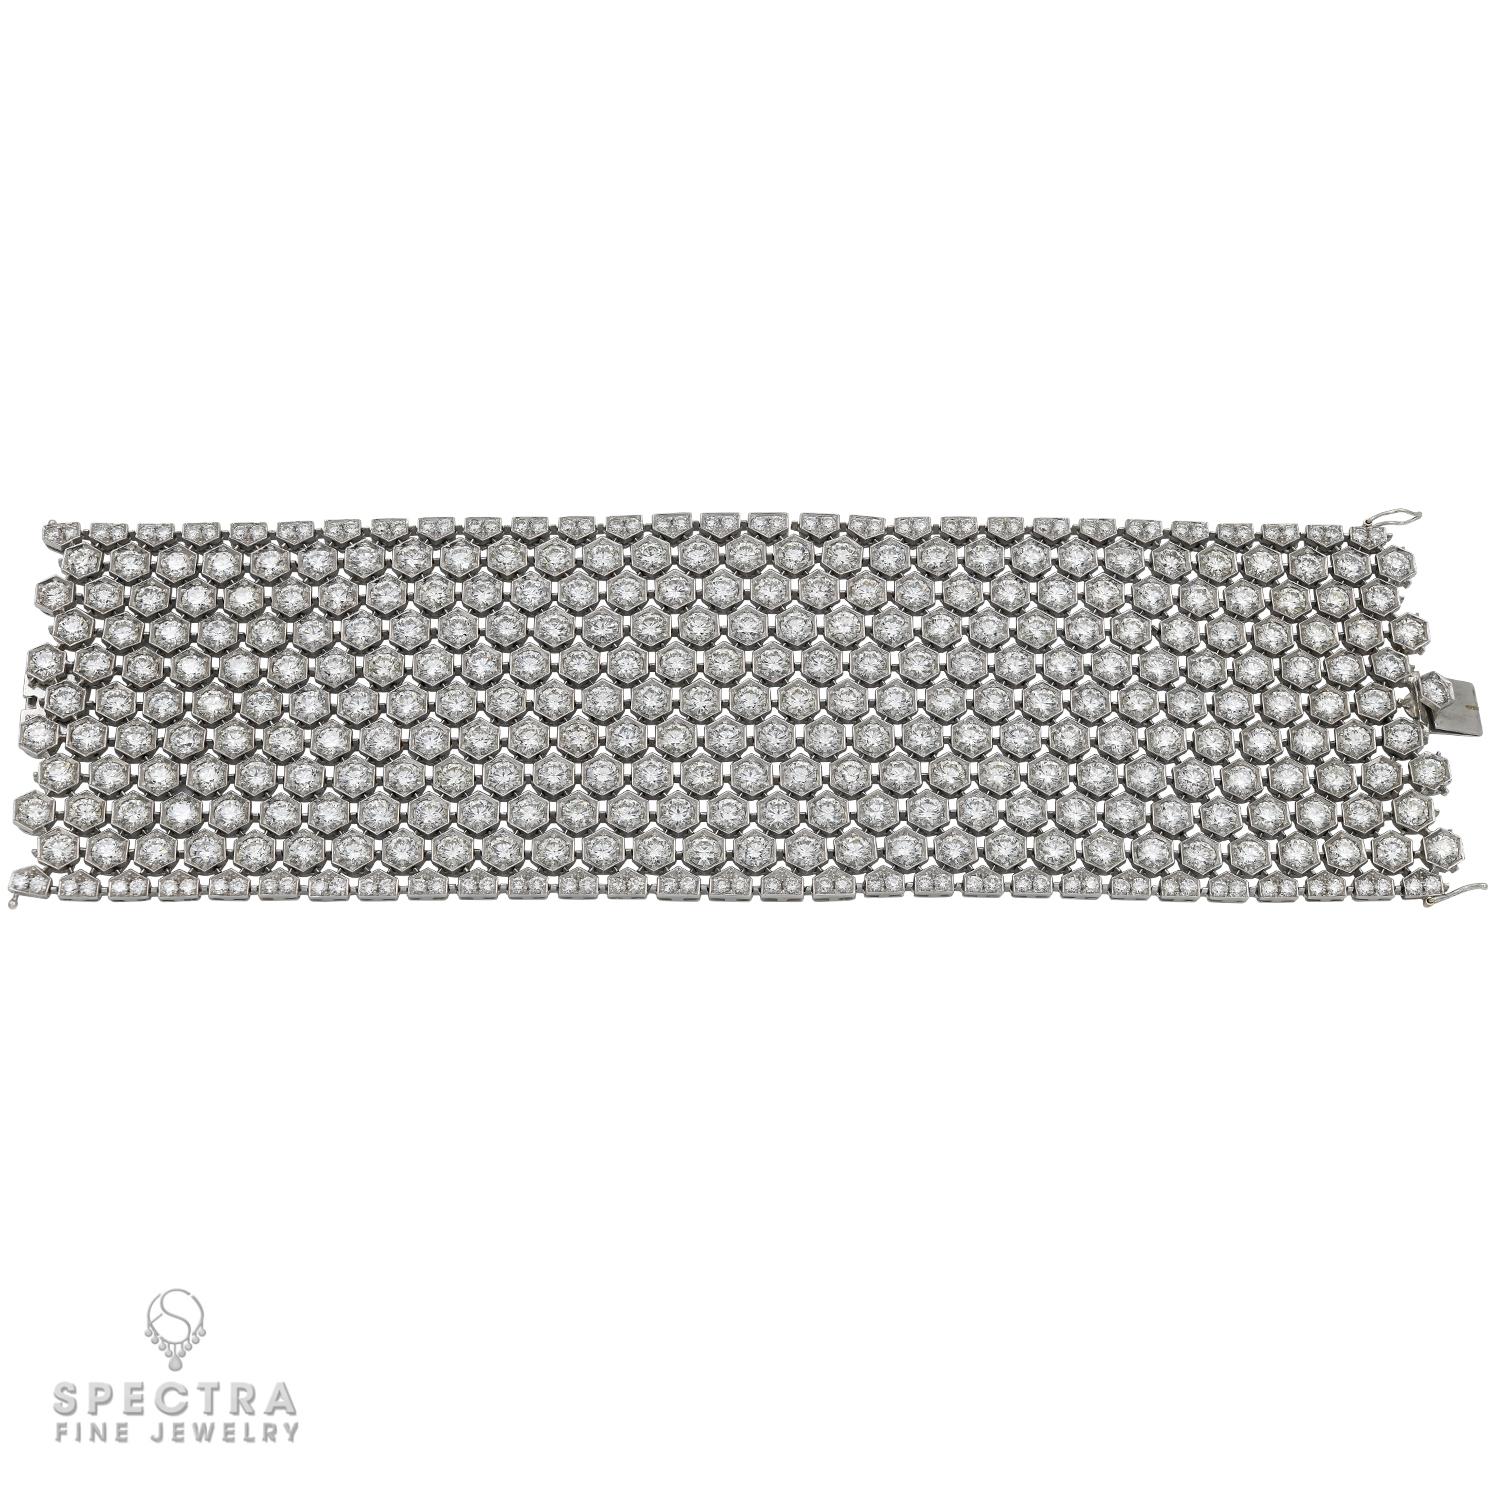 Chic flexible bracelet embellished with diamonds and set in 18K white gold.
72 carats of round diamonds, F-G colors, VS clarity.
The bracelet is 7.25 in long and 2.16 in wide. 
Gross weight 126.51 gr.